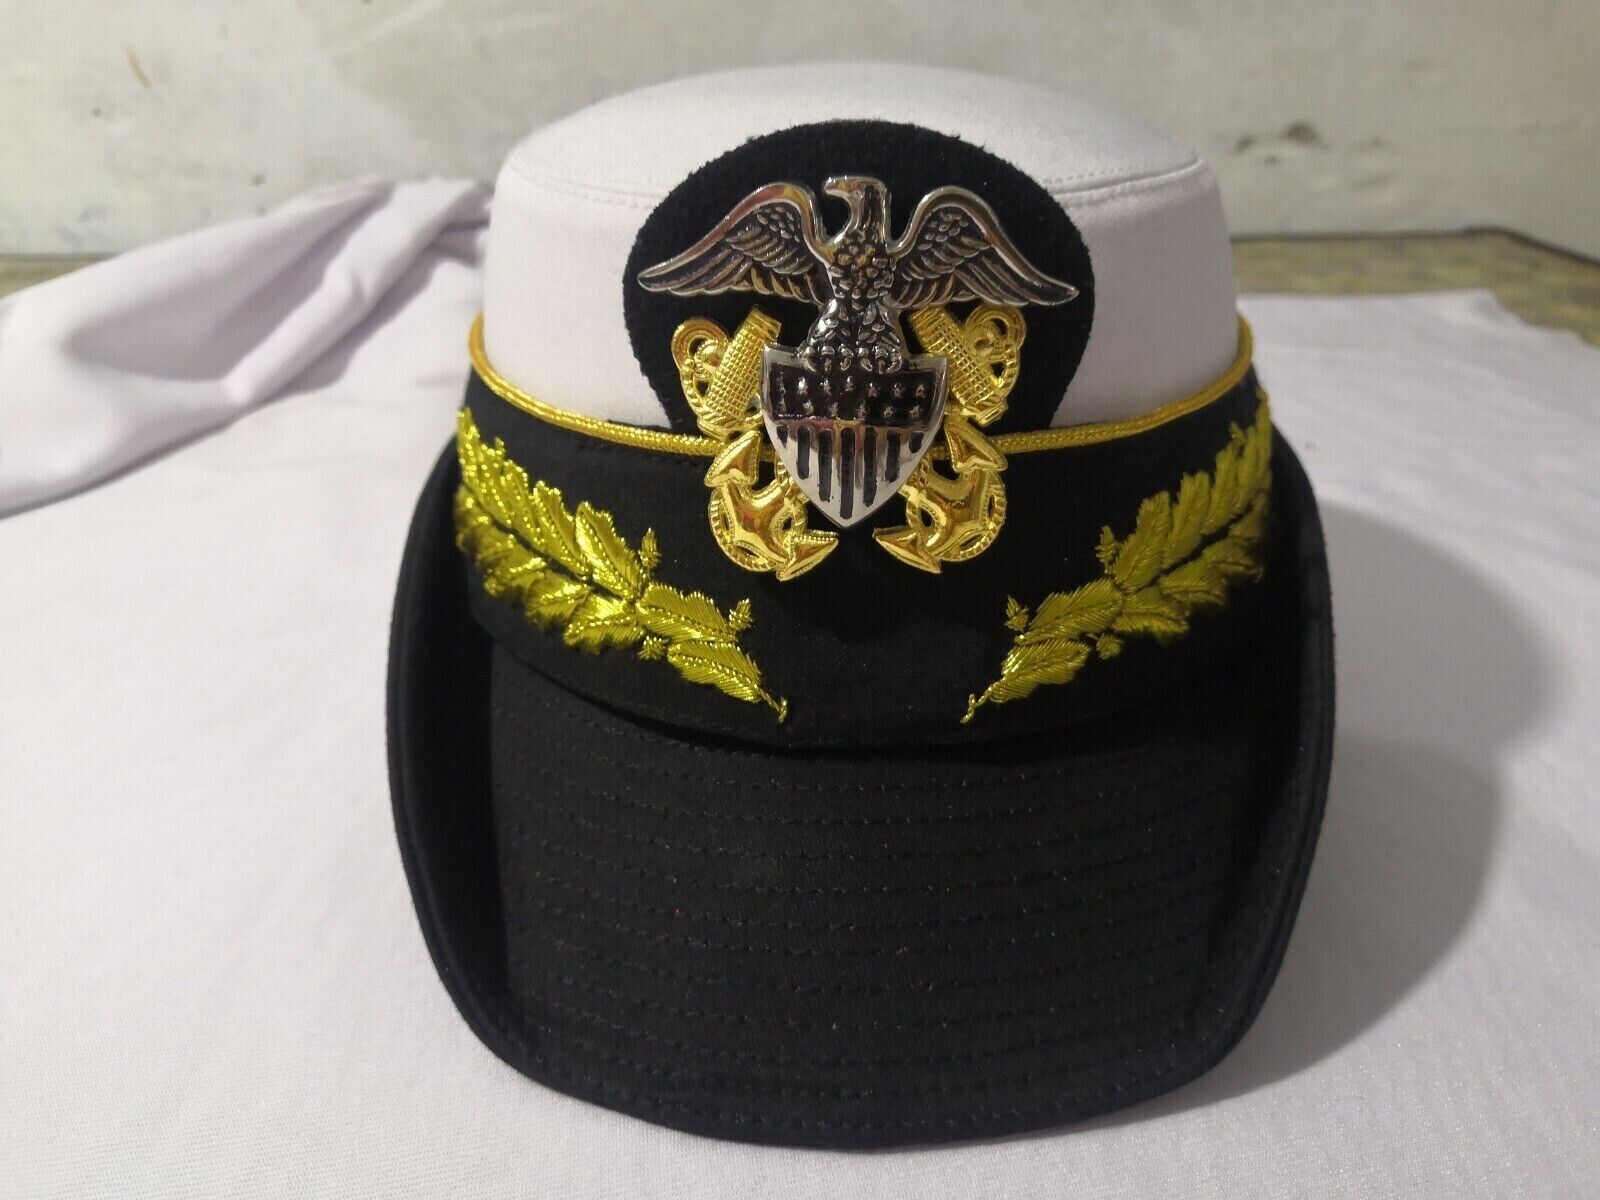 US navy ladies hat available in both ranks captain and admiral...